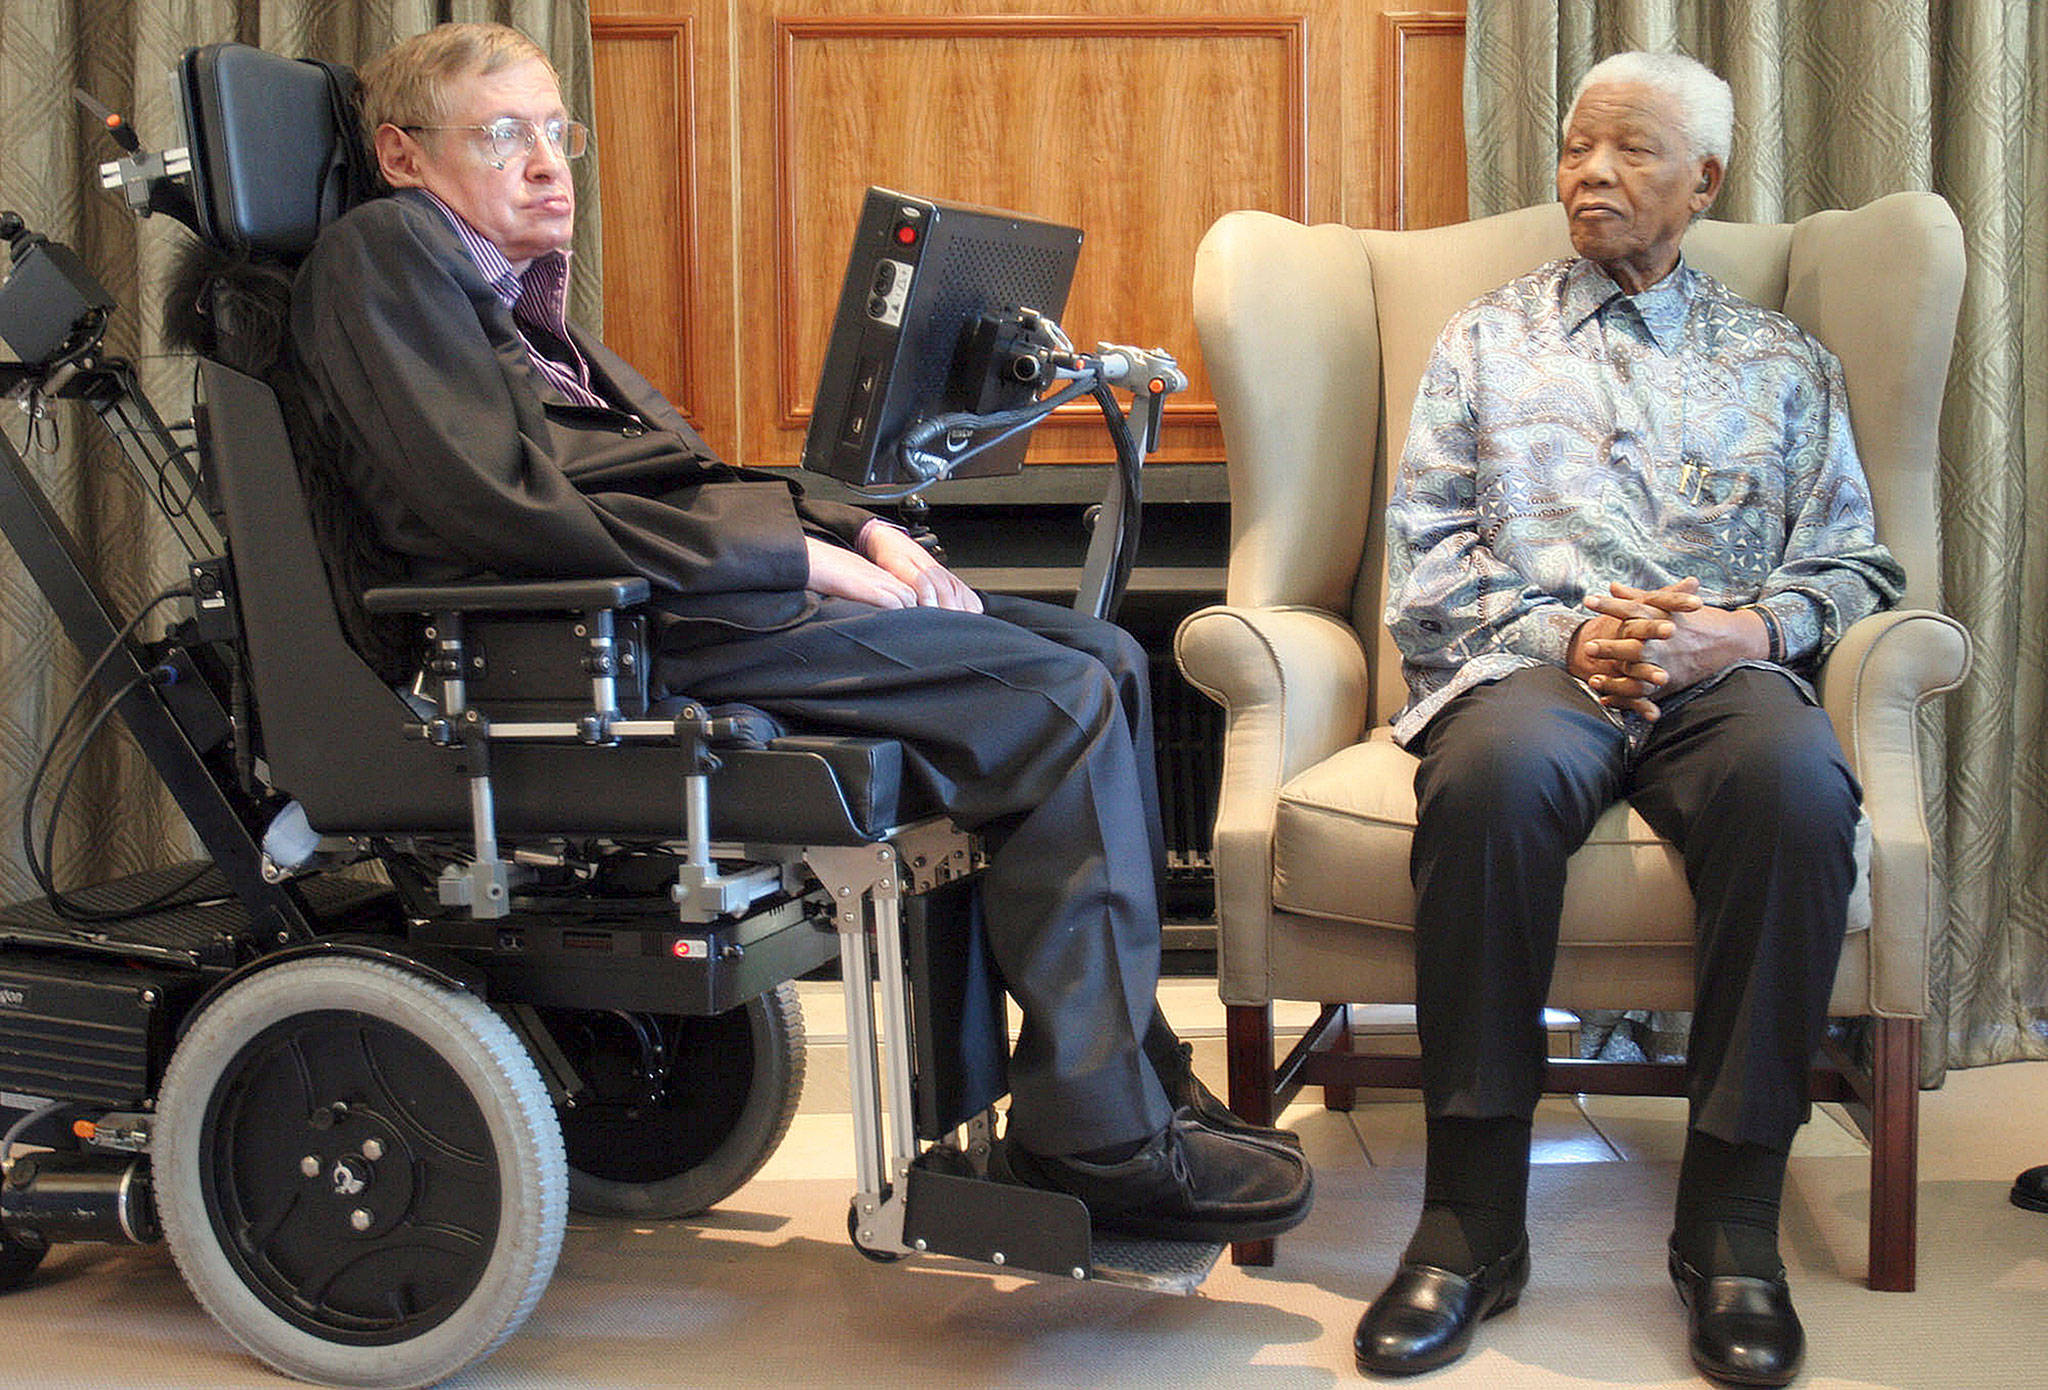 British scientist Stephen Hawking (left) meets with former South African President Nelson Mandela in Johannesburg in 2008. Hawking, whose brilliant mind ranged across time and space though his body was paralyzed by disease, has died. (AP Photo/Denis Farrell, File)